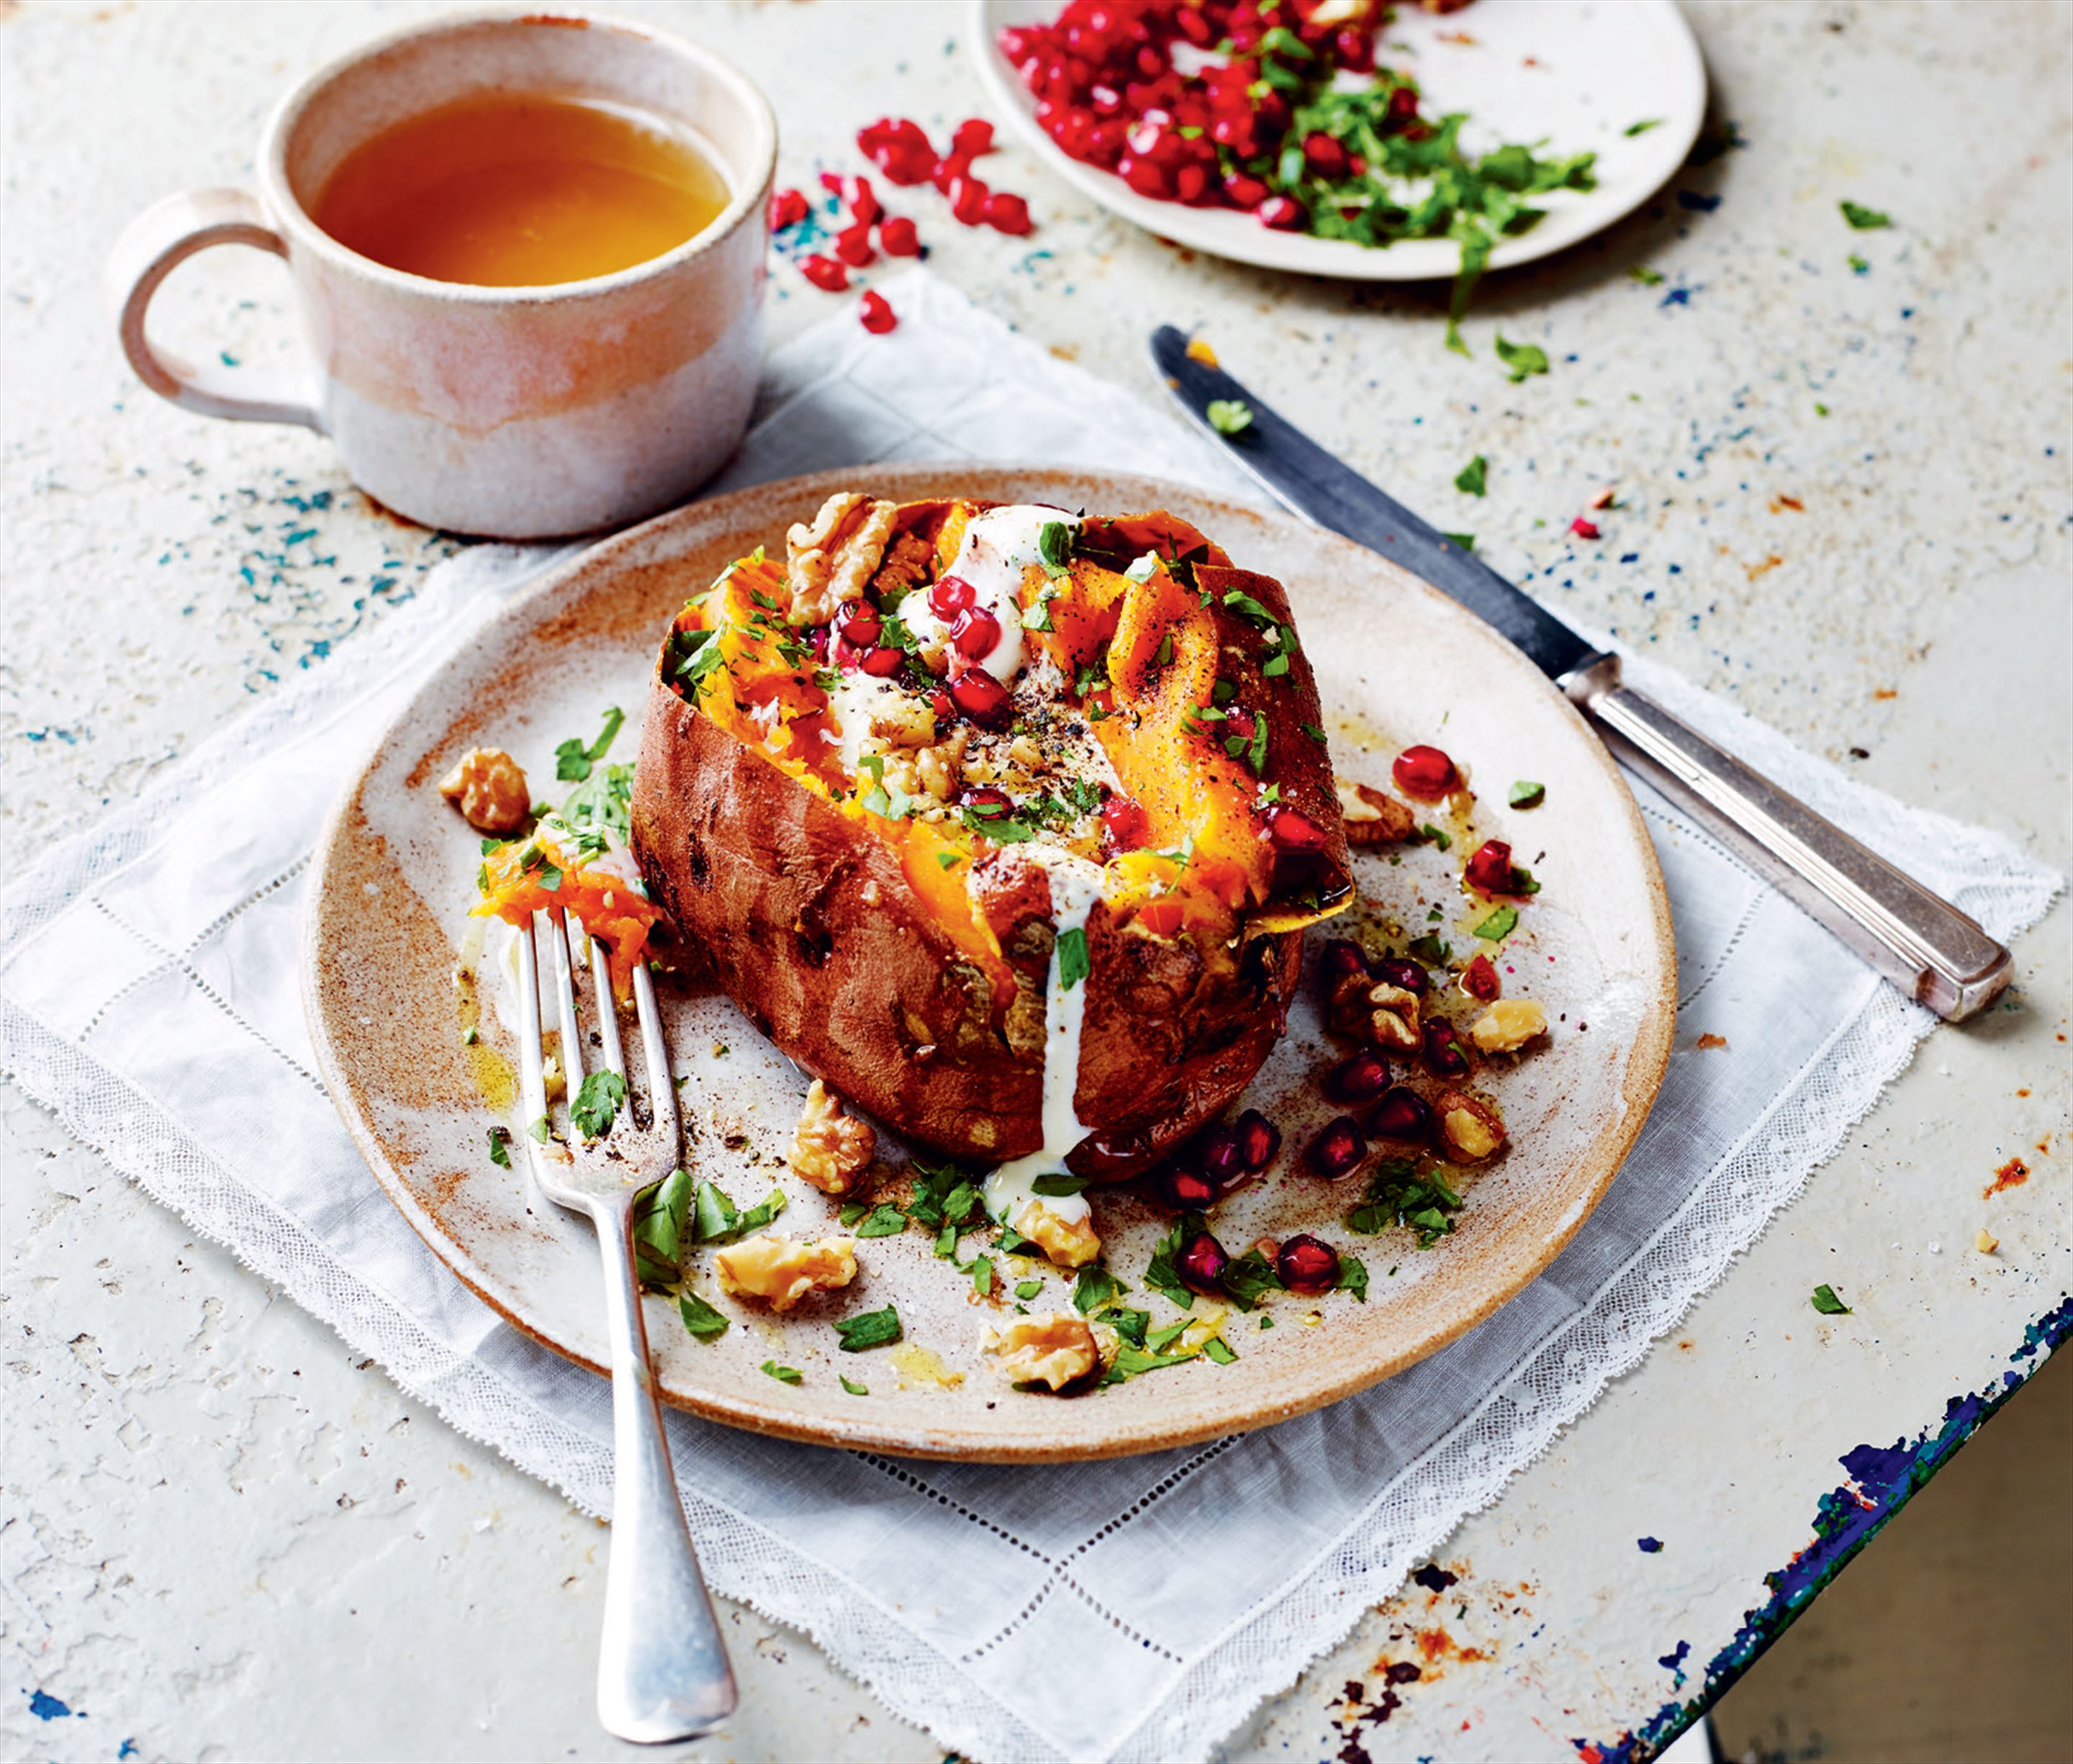 Sweet jacket potatoes with yoghurt, pomegranate, and toasted walnuts